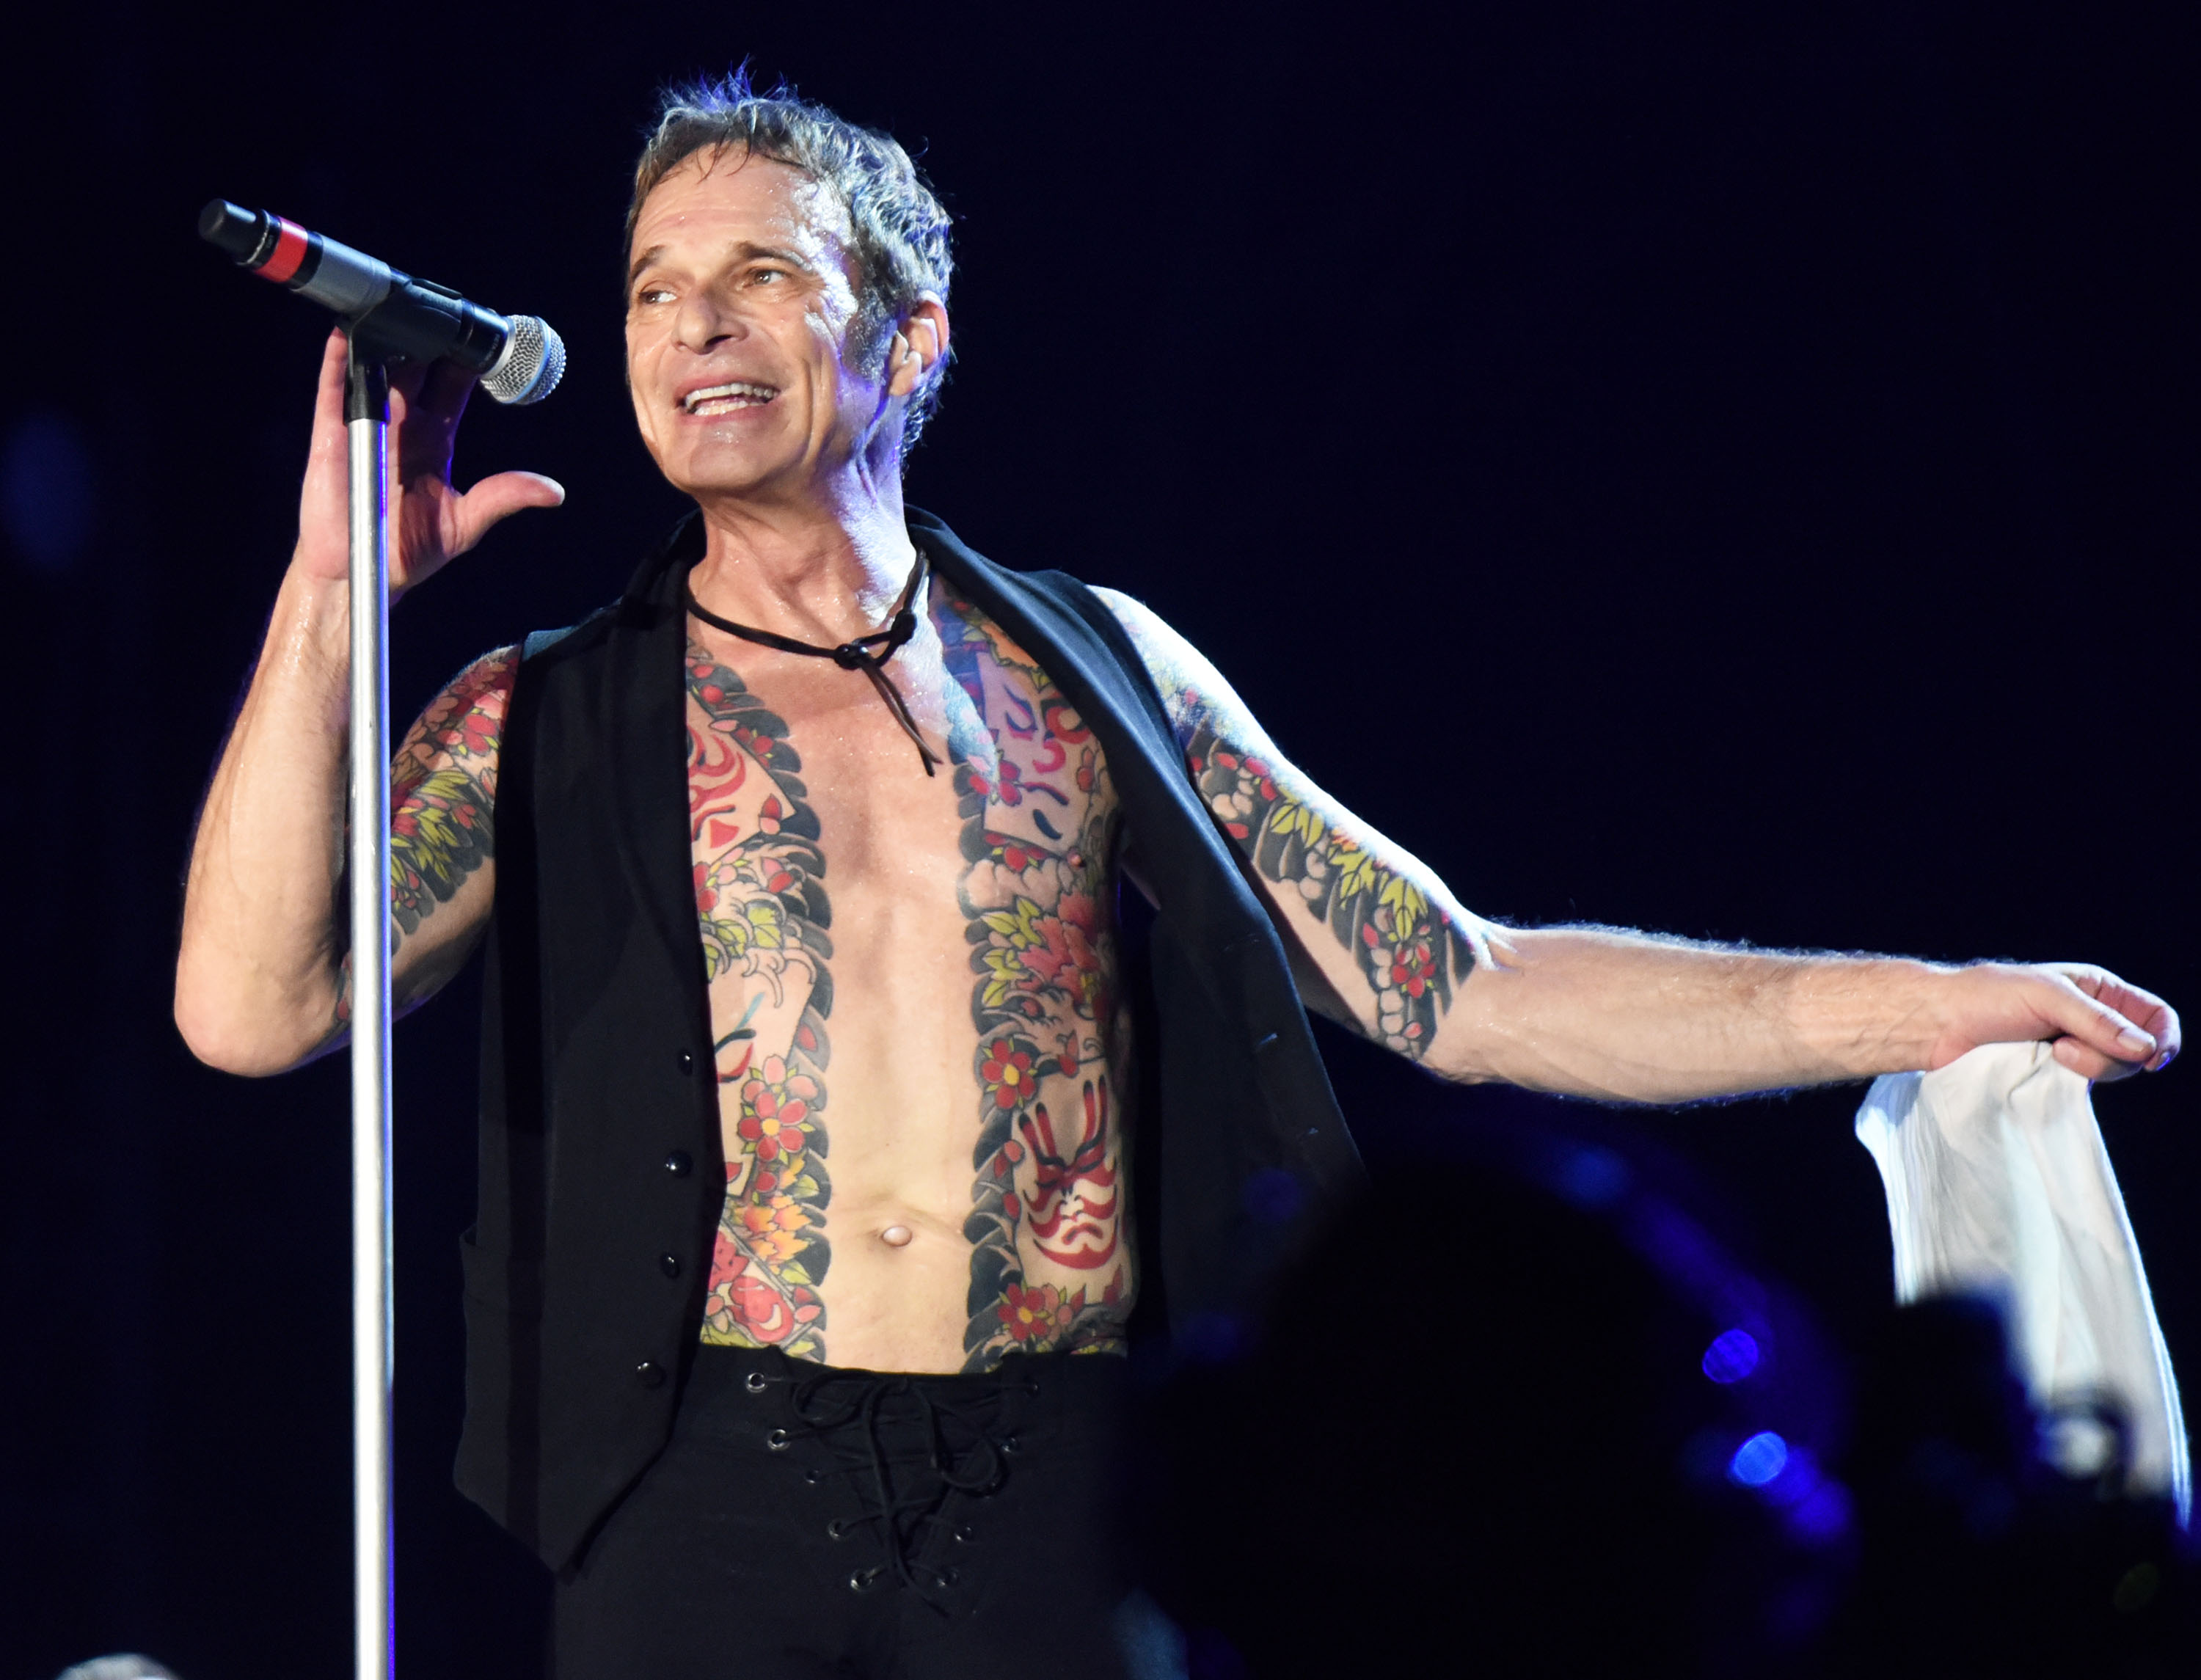 Here’s How You Can Become David Lee Roth… According To Him